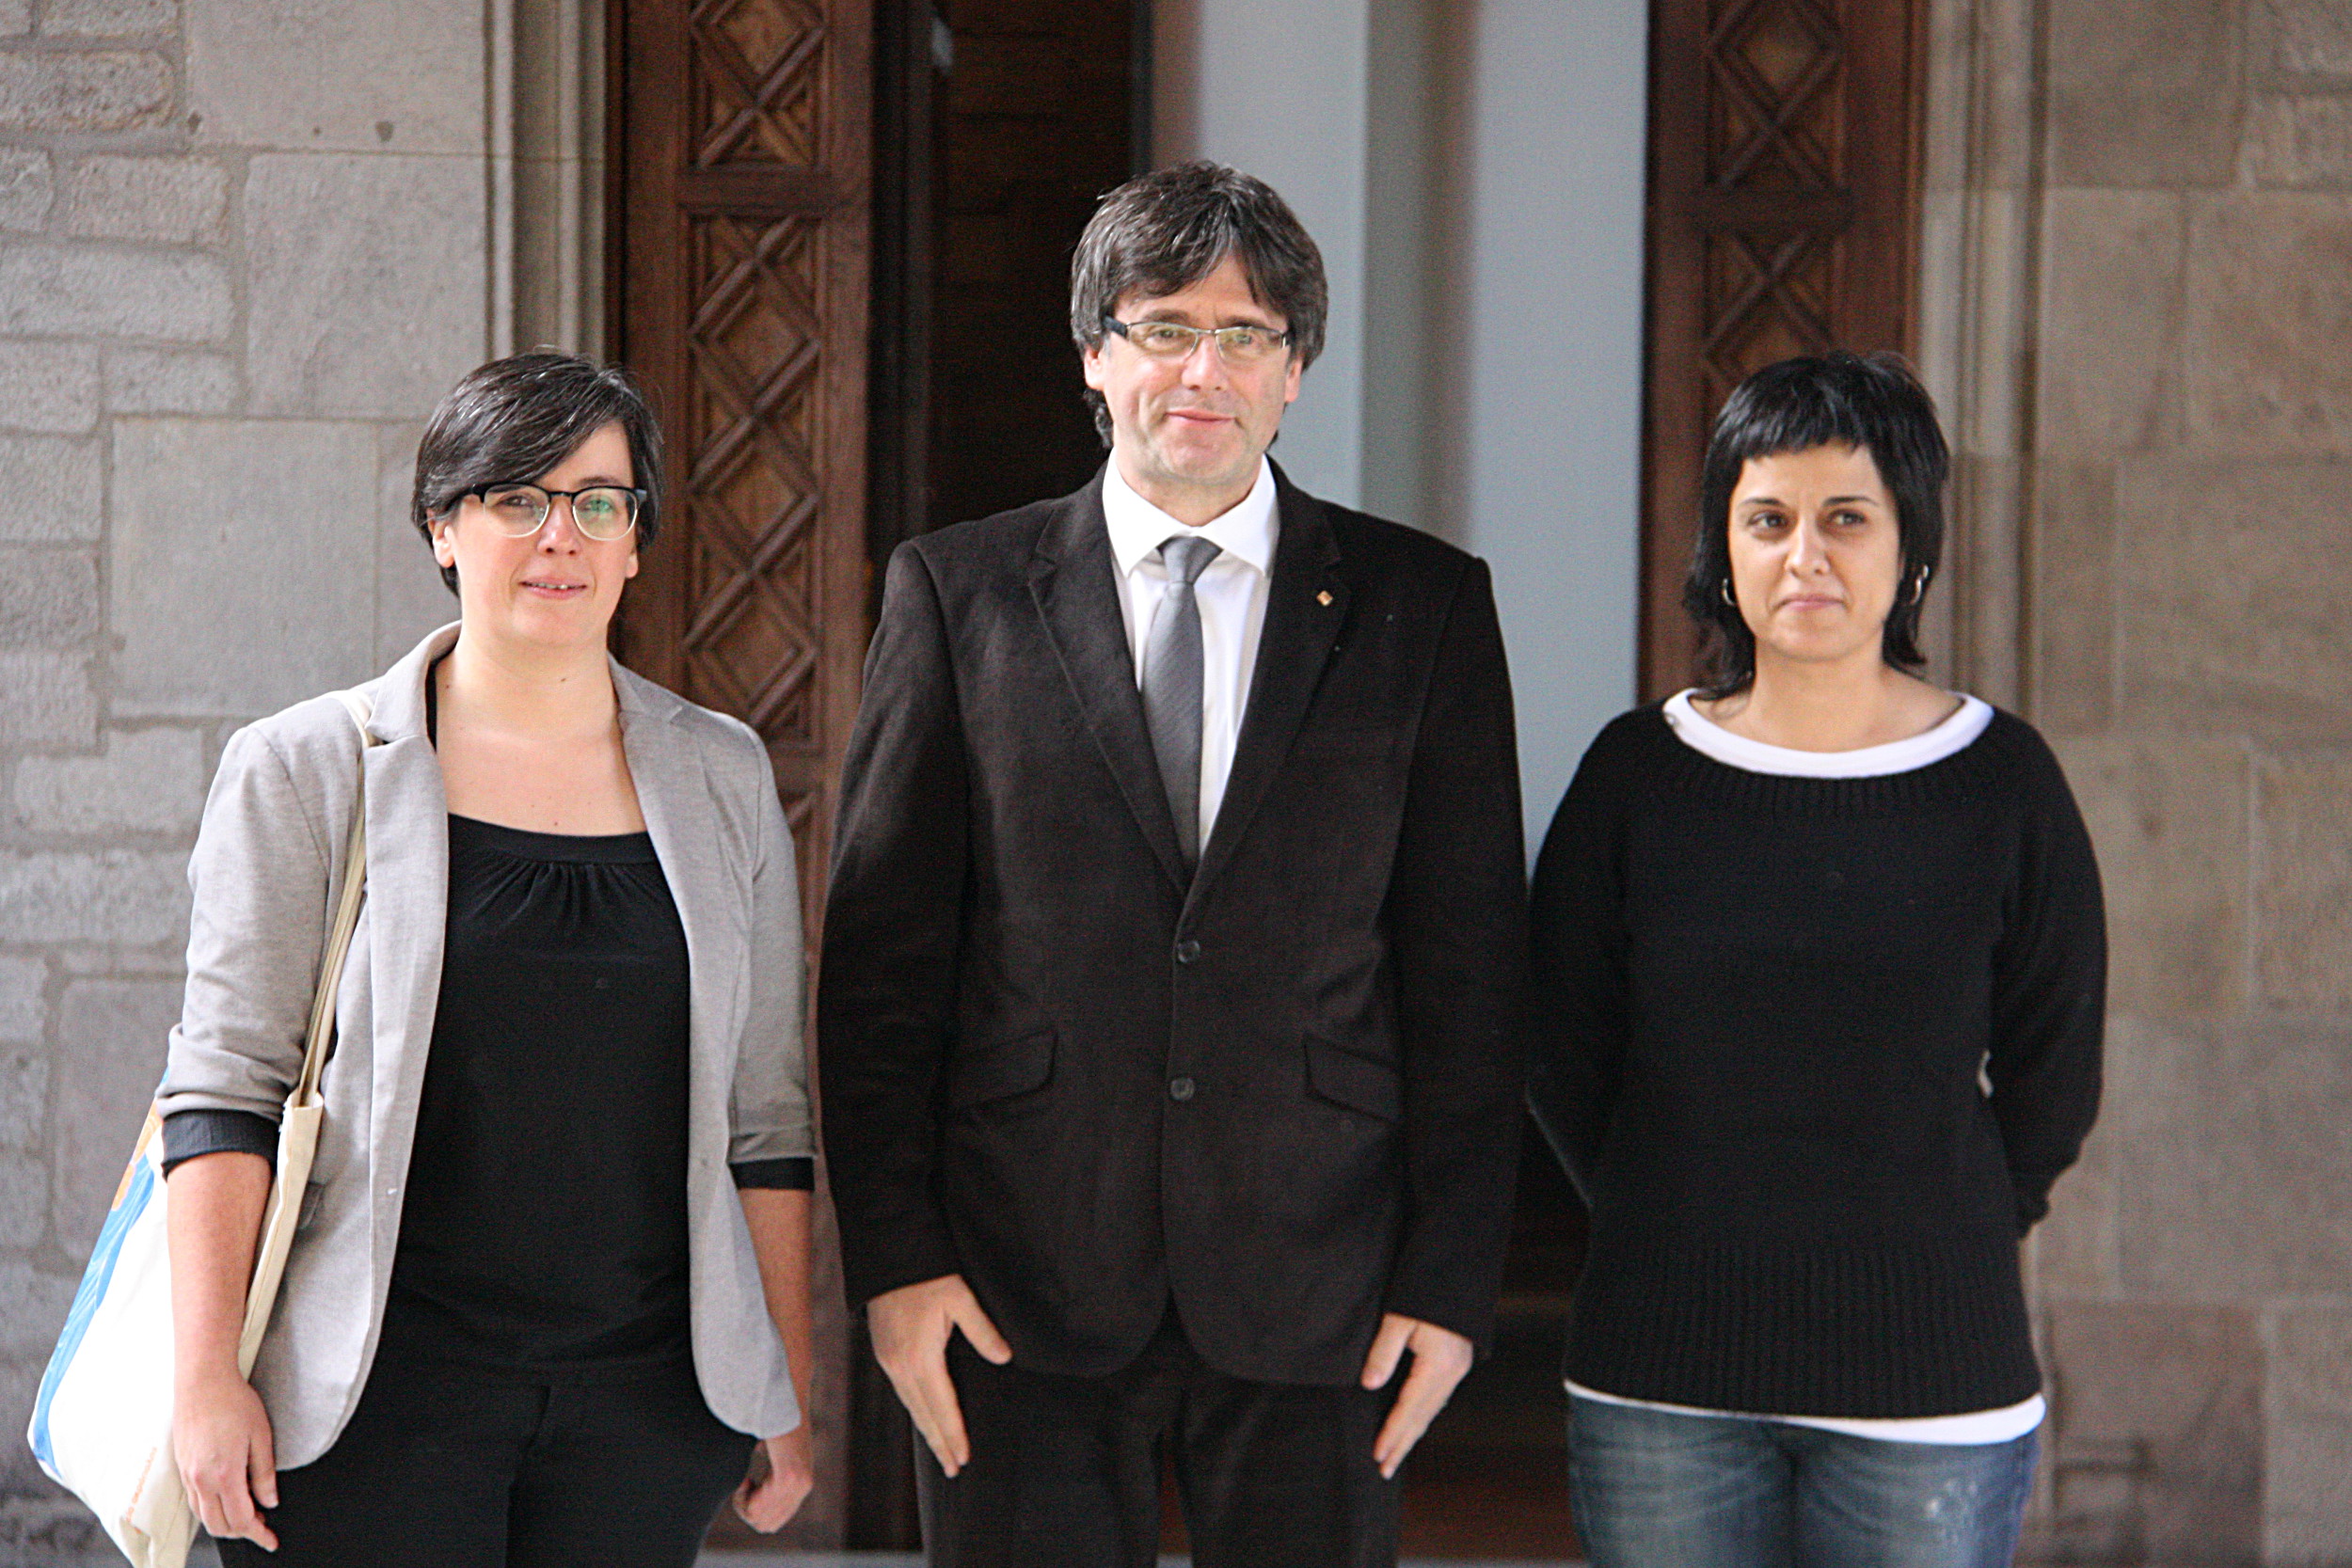 Catalan President, Carles Puigdemont, joined by CUP MPs Anna Gabriel and Mireia Boya, on a picture taken last February (by ACN)